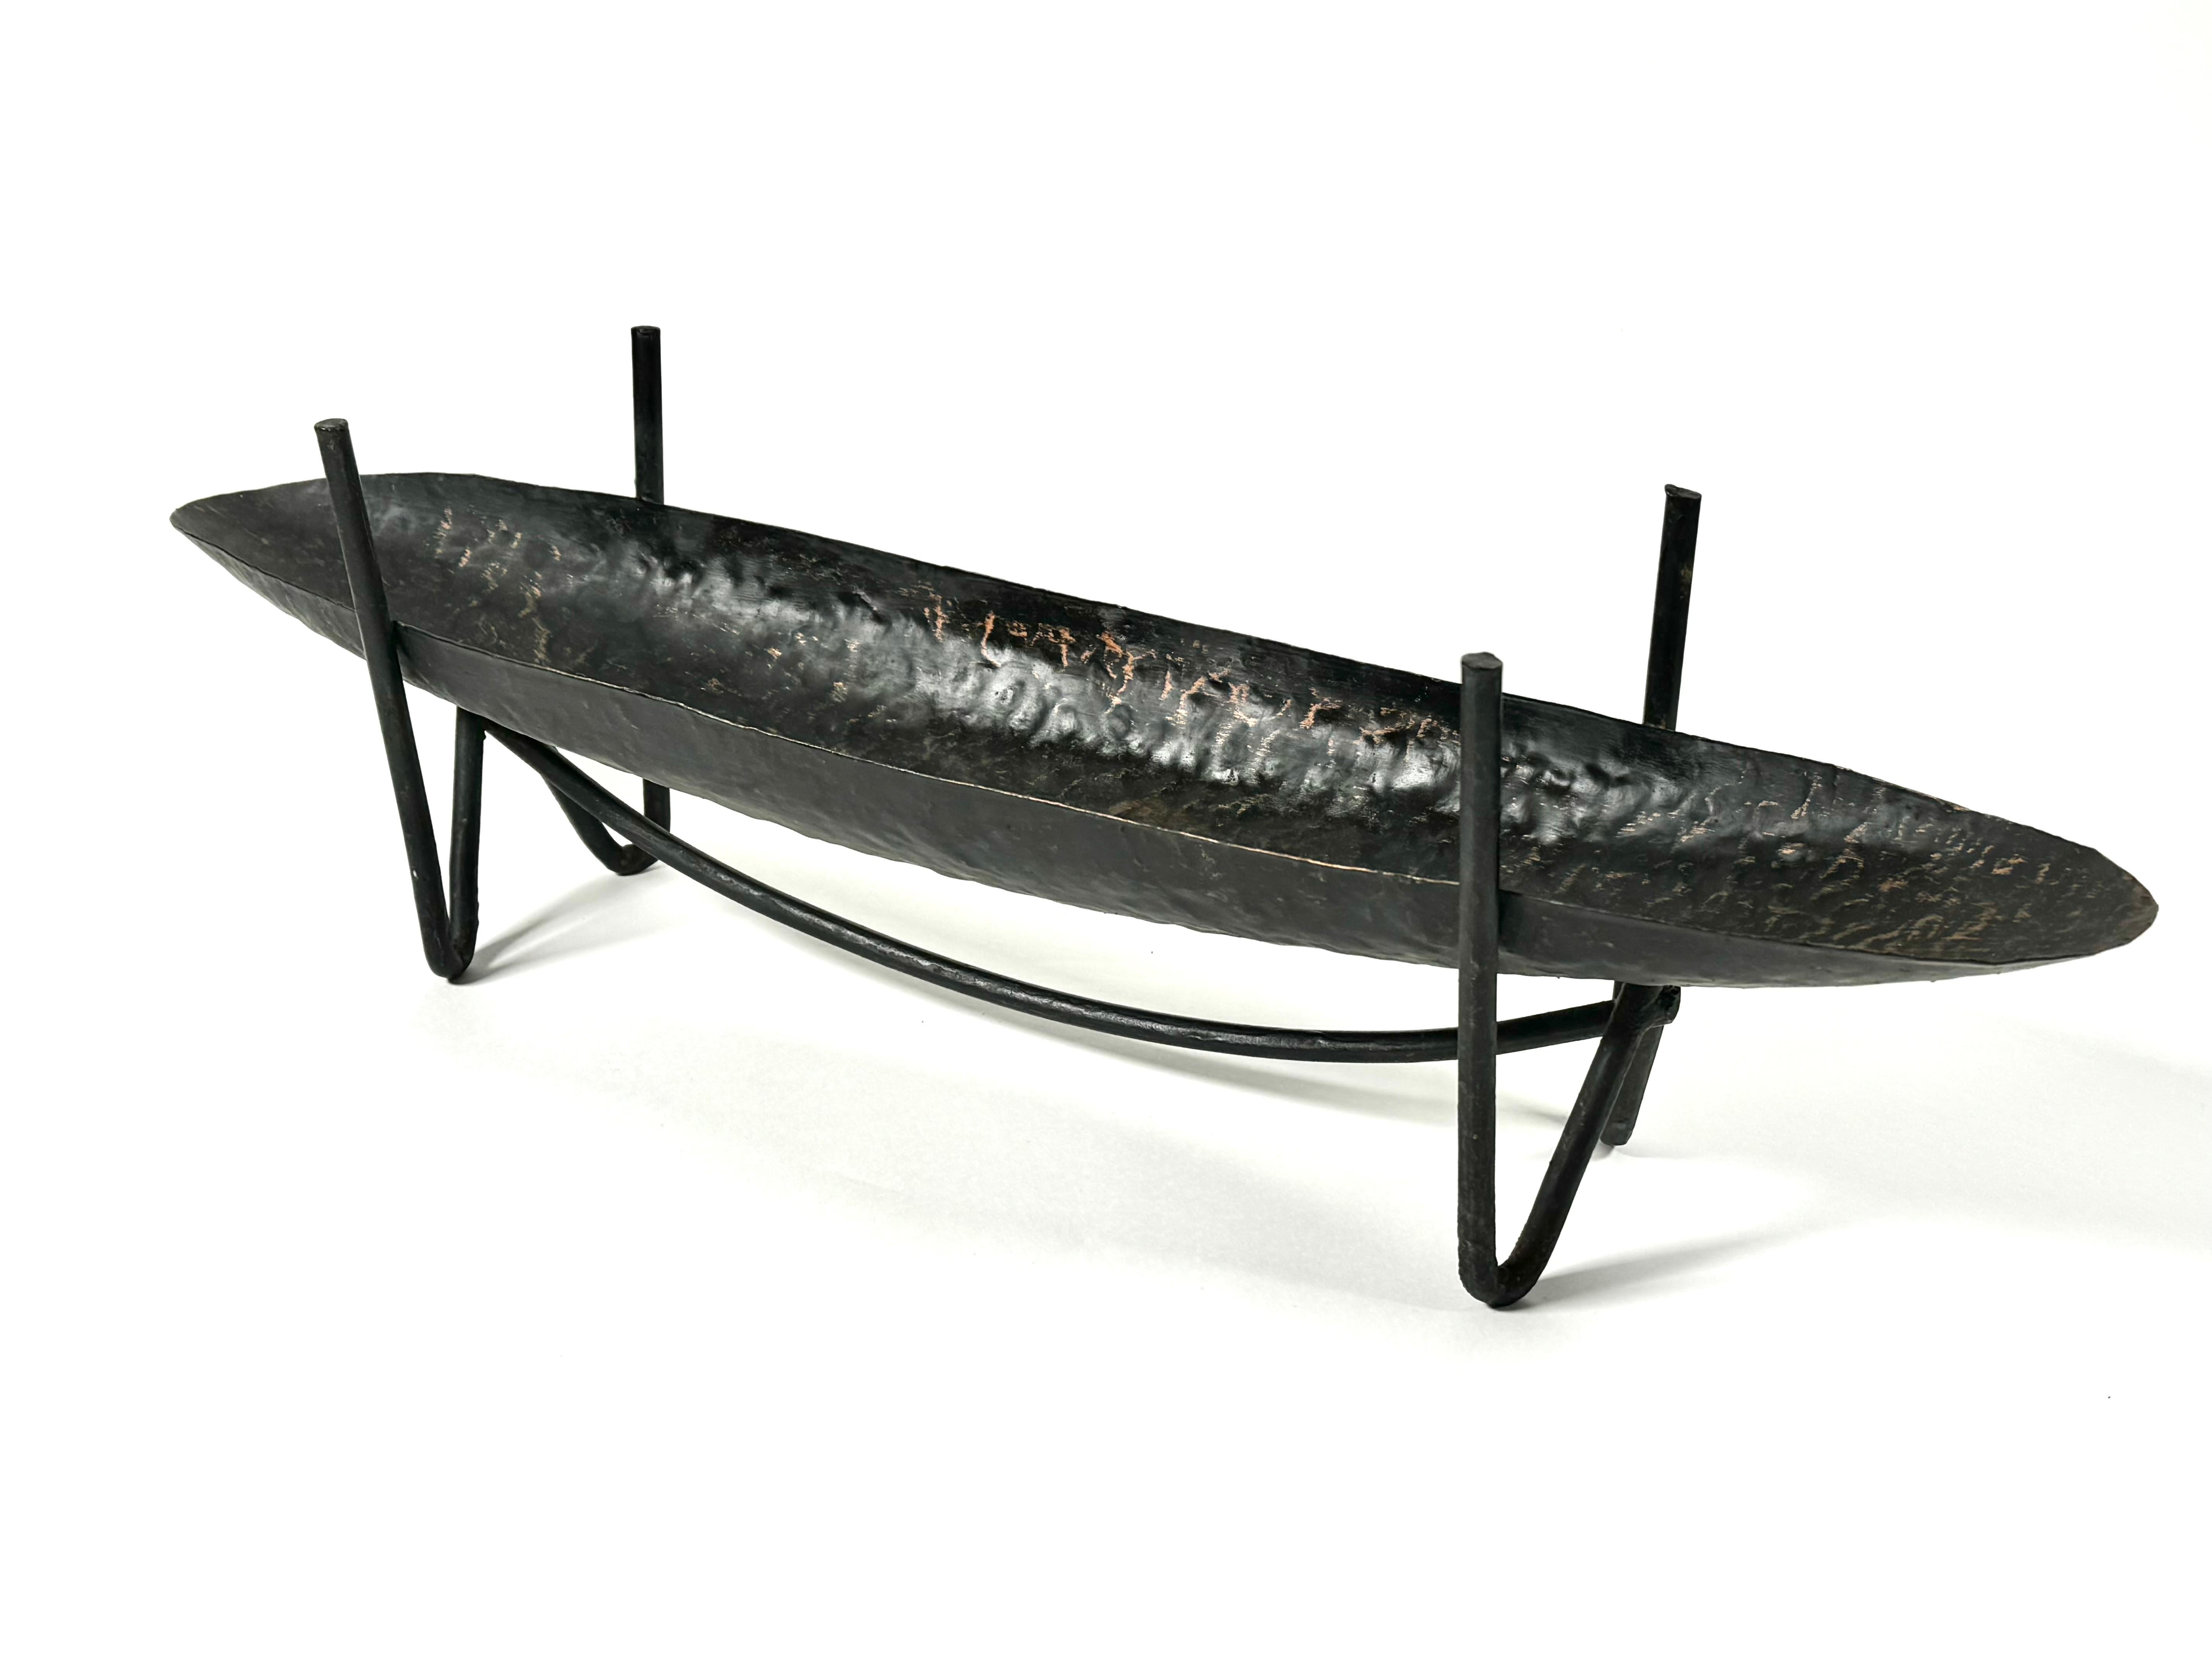 Purchased directly from Japan is this 1950s  modernist all metal ikebana vase, created out of hammered metal and welded wrought iron for the legs. The tray is an elongated narrow oval, the legs are a stylized hair pin with risers on the sides and a